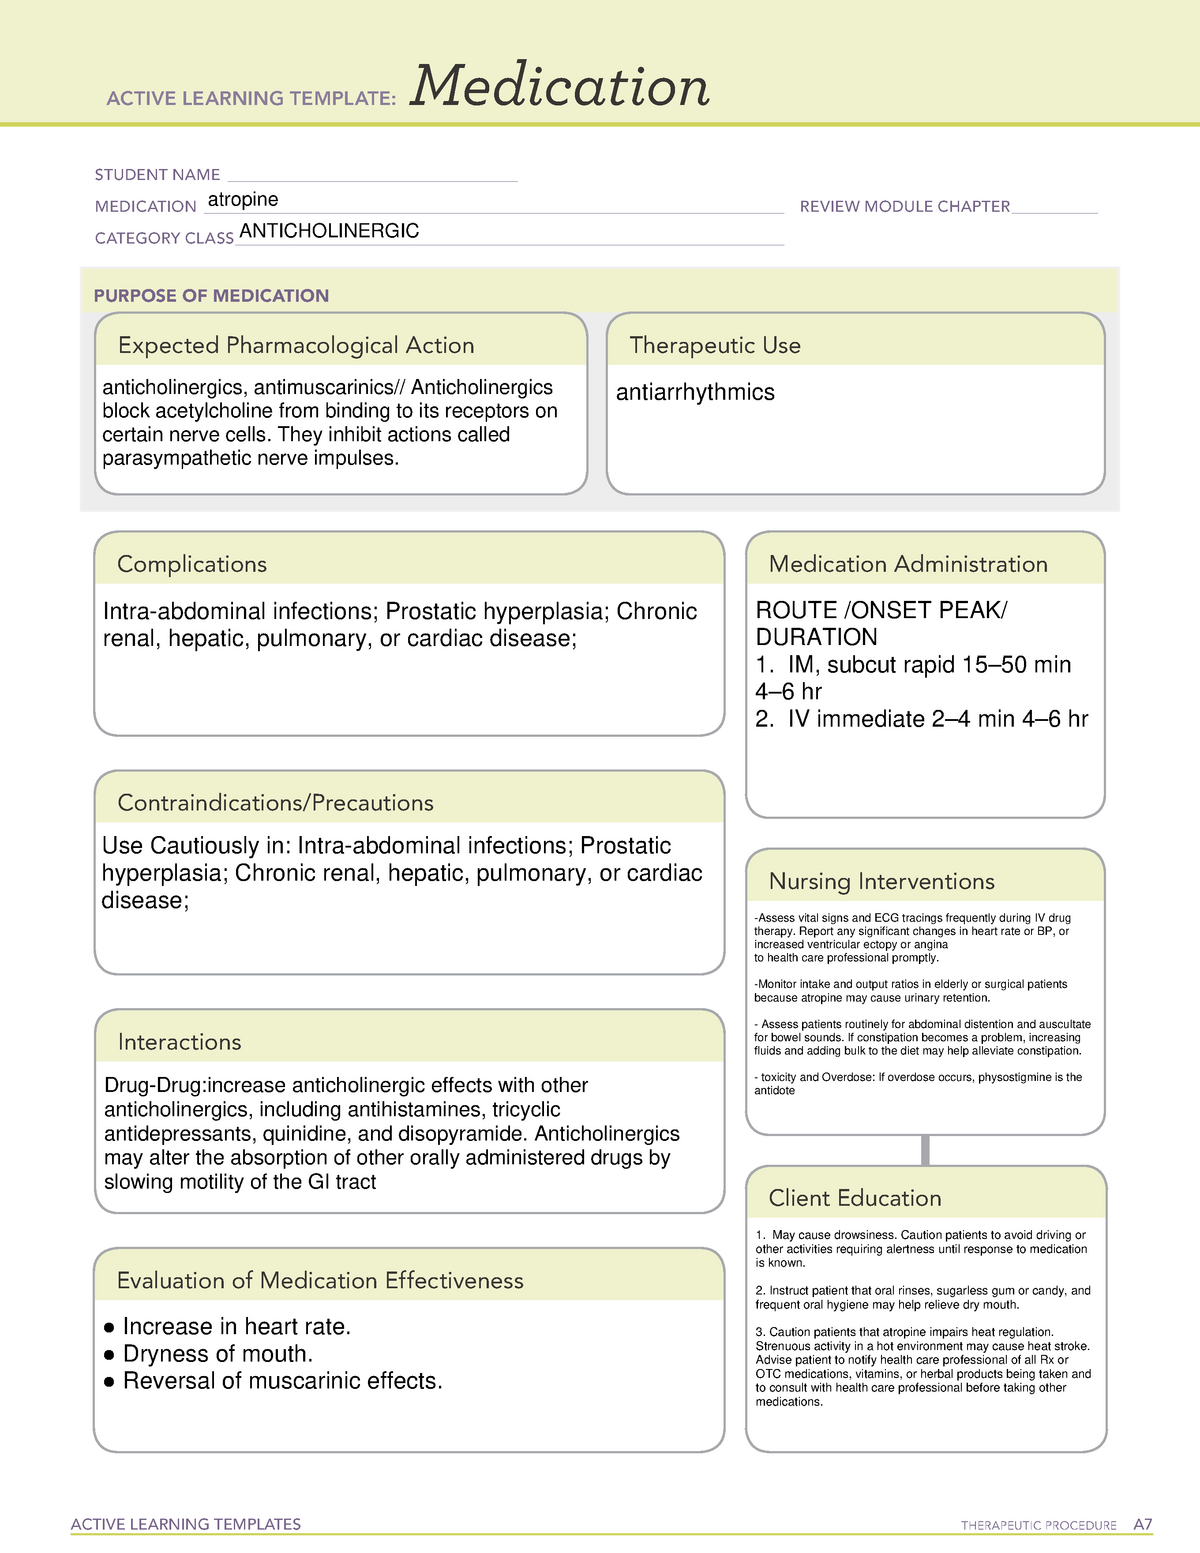 active-learning-template-medication-anticholinergic-active